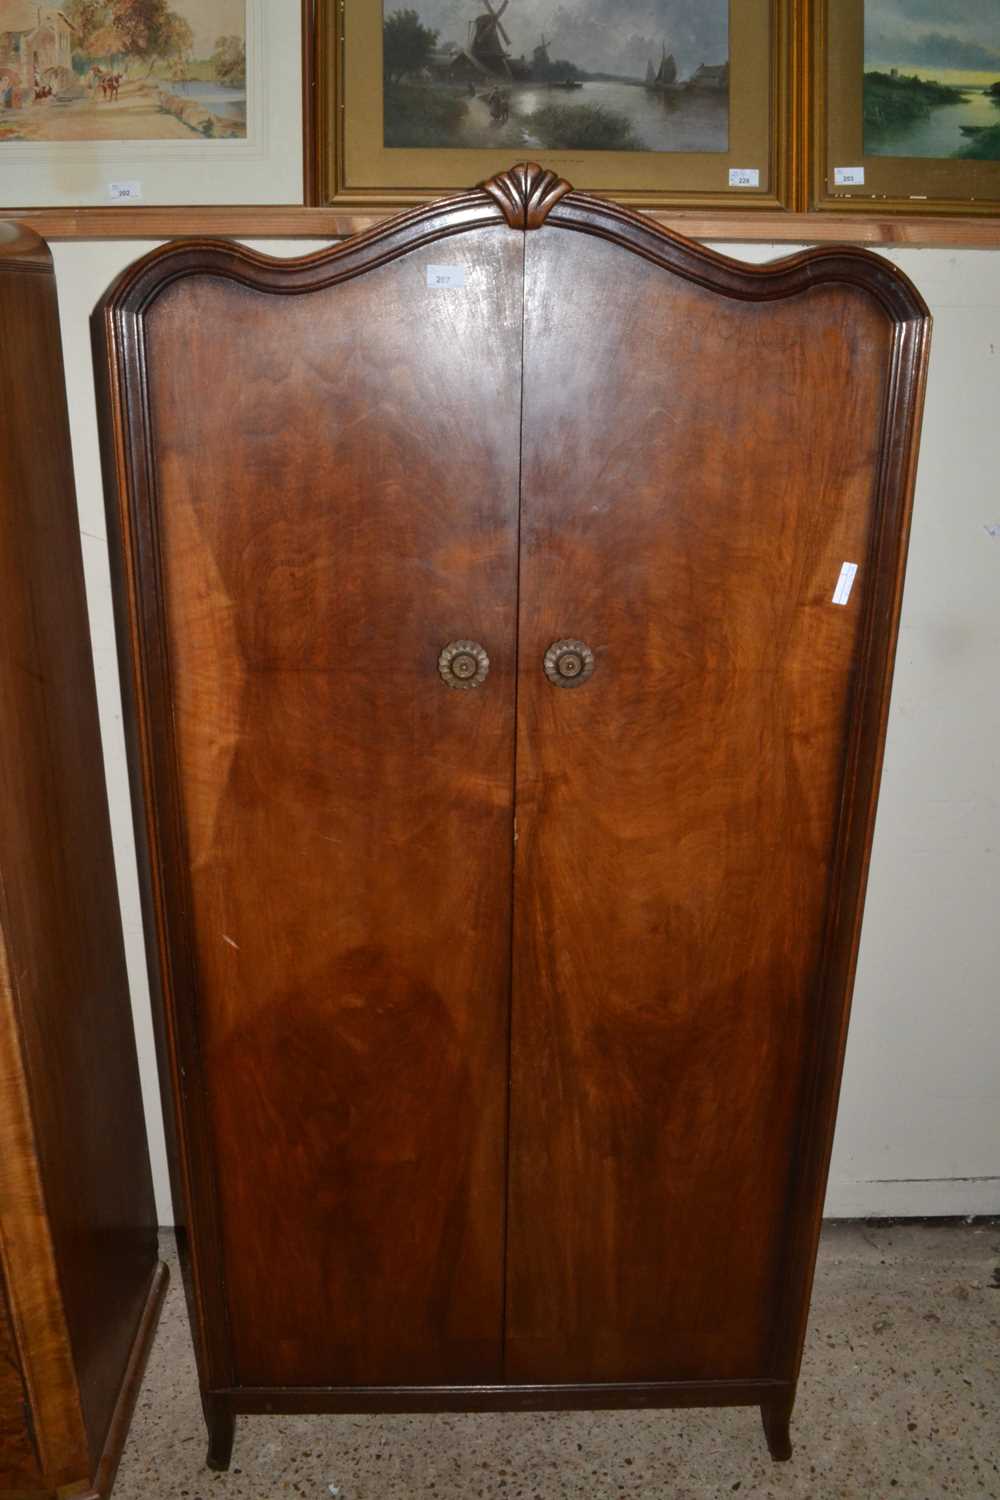 Small 20th Century double door wardrobe with arched top